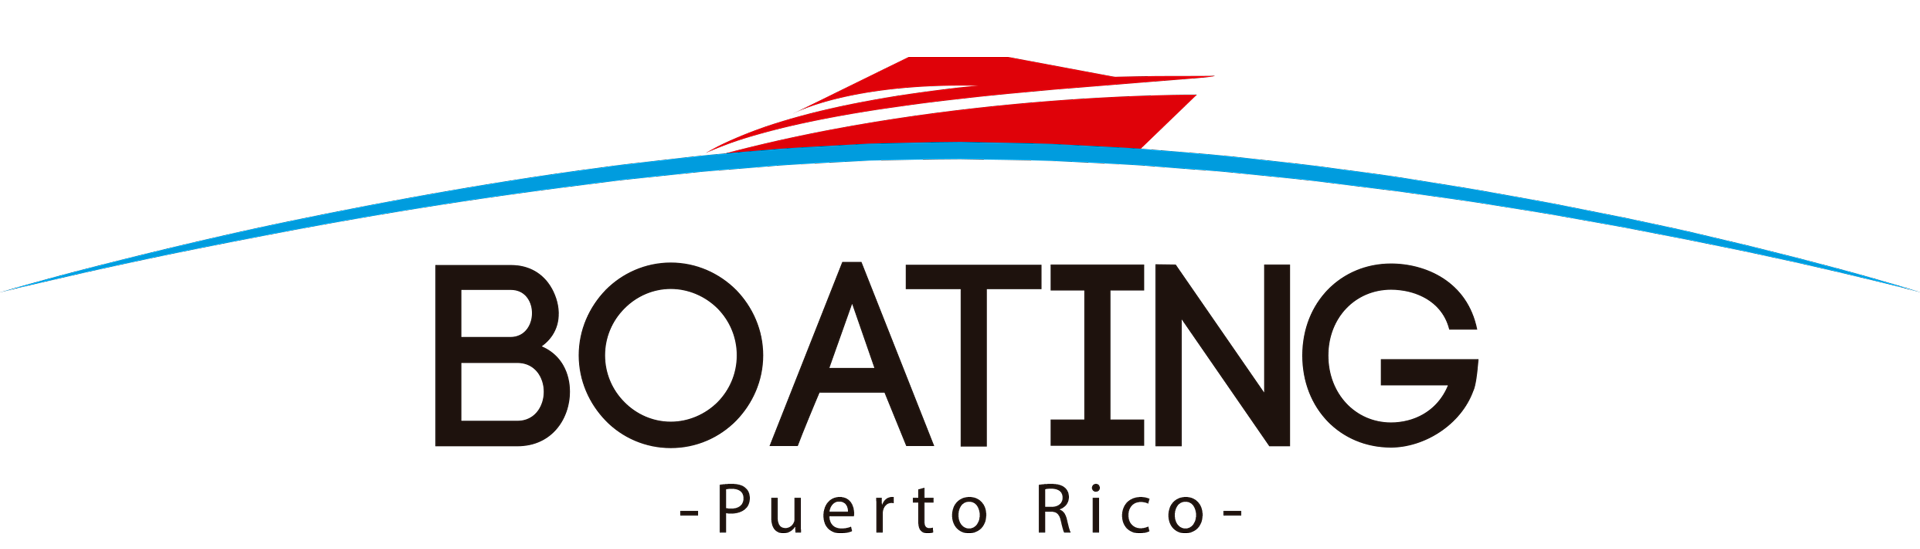 private yacht rental puerto rico